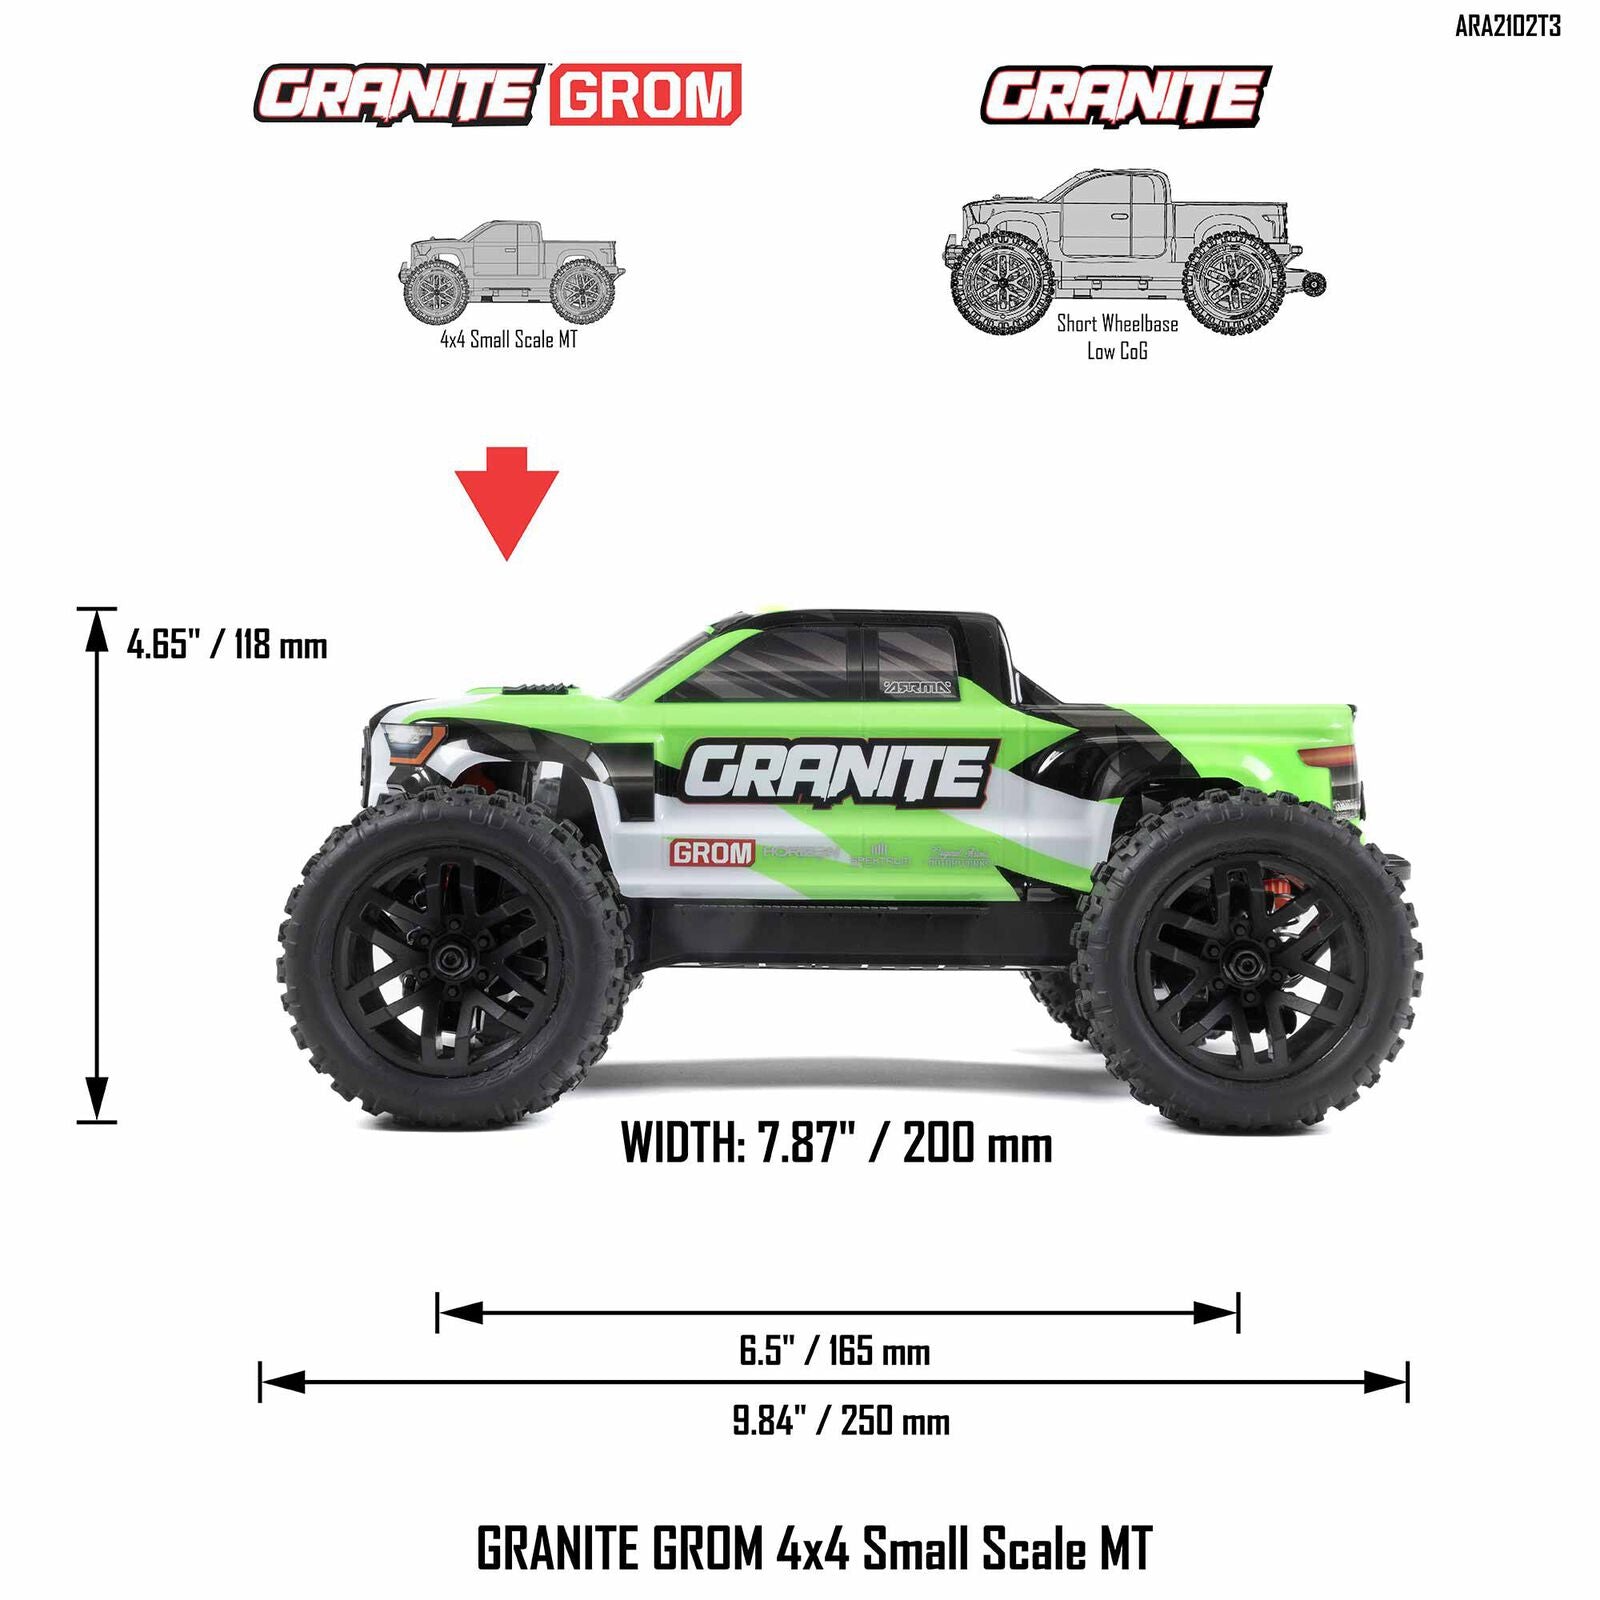 GRANITE GROM MEGA 1/18 380 Brushed 4X4 Monster Truck RTR with Battery & Charger Green